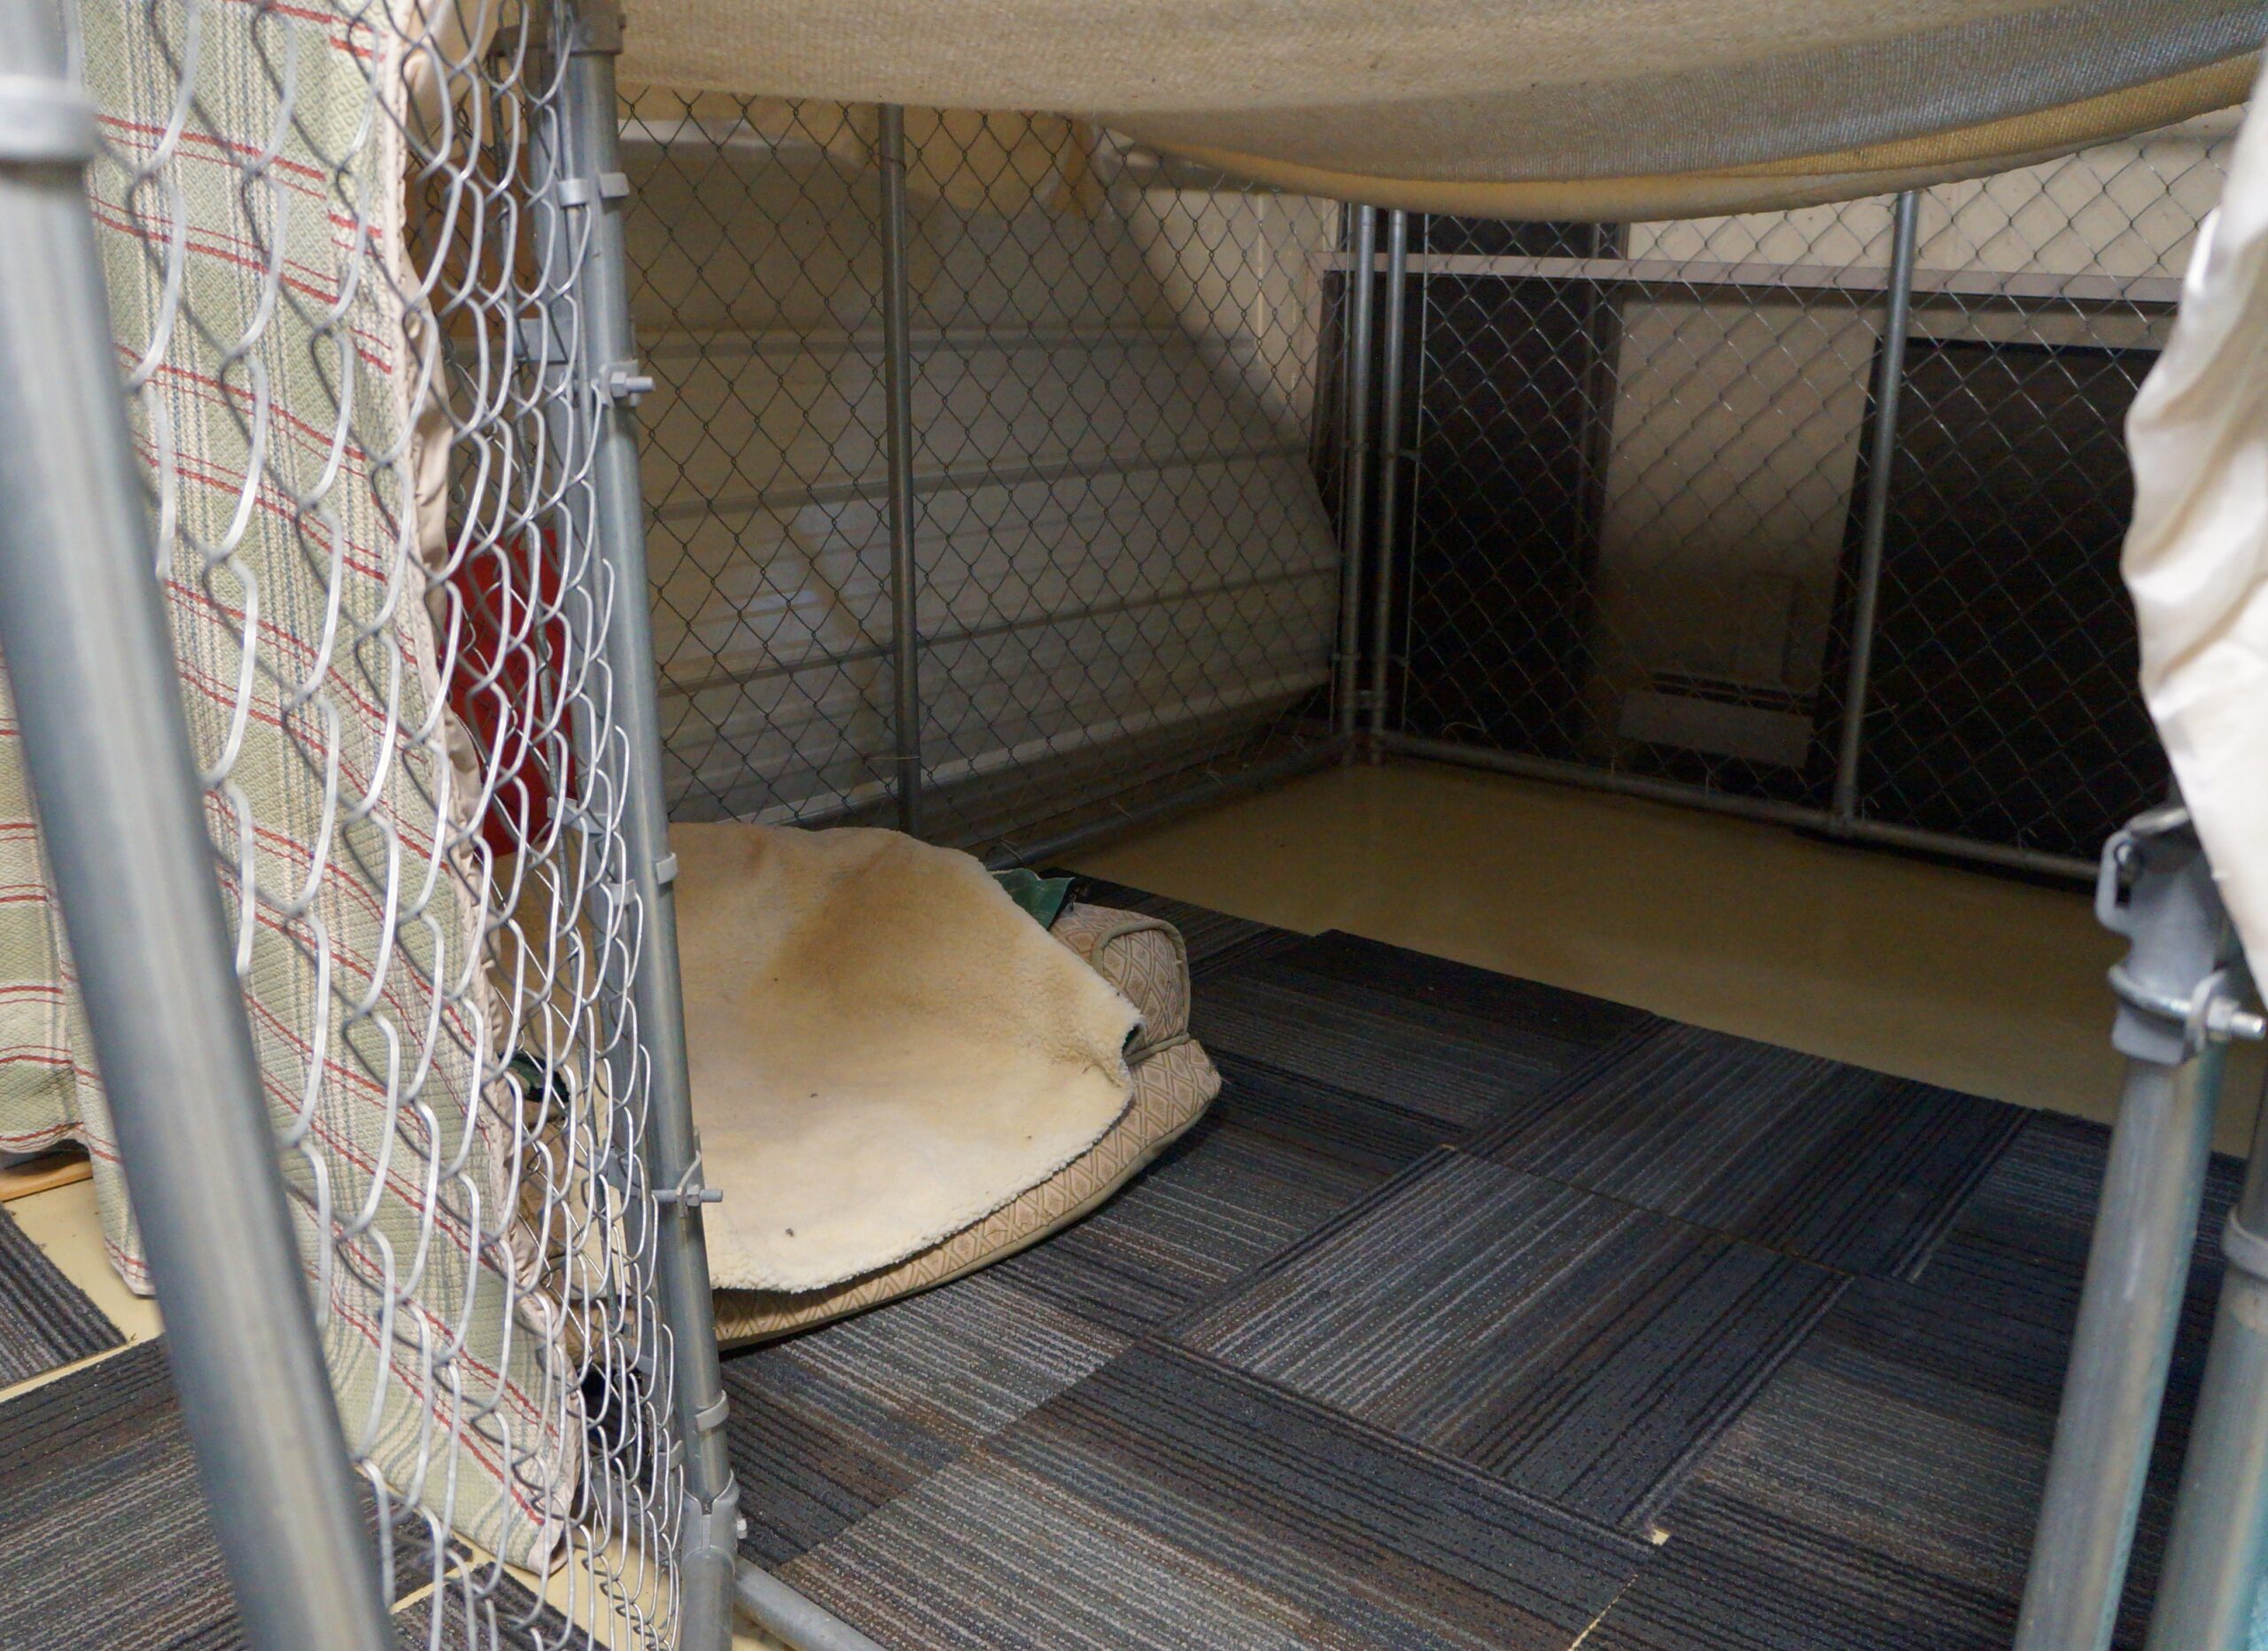 foster puppy set up - photo of dog chain link kennel draped with blankets